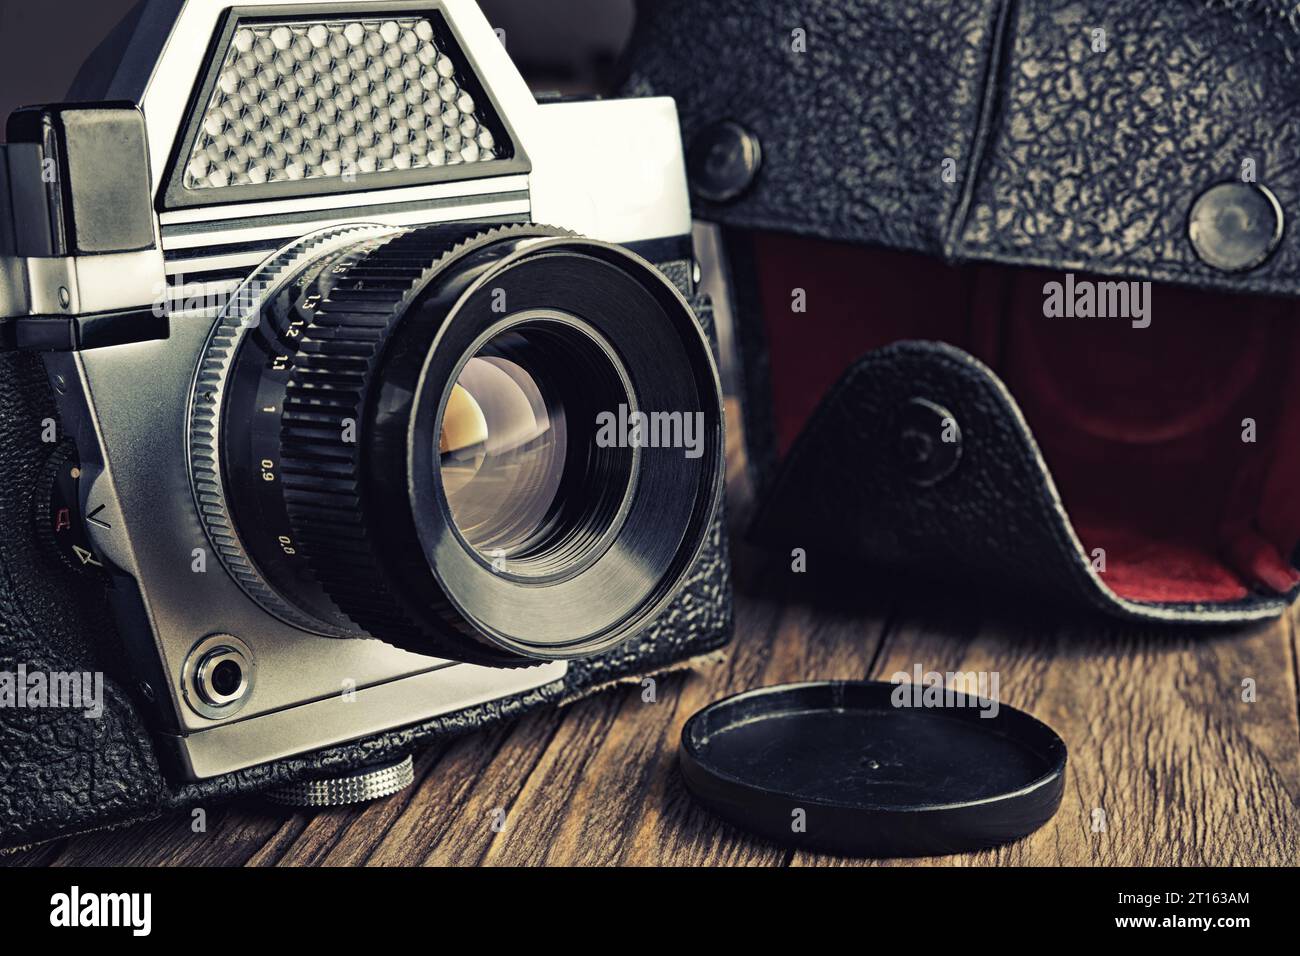 Old vintage photo camera and black leather case Stock Photo